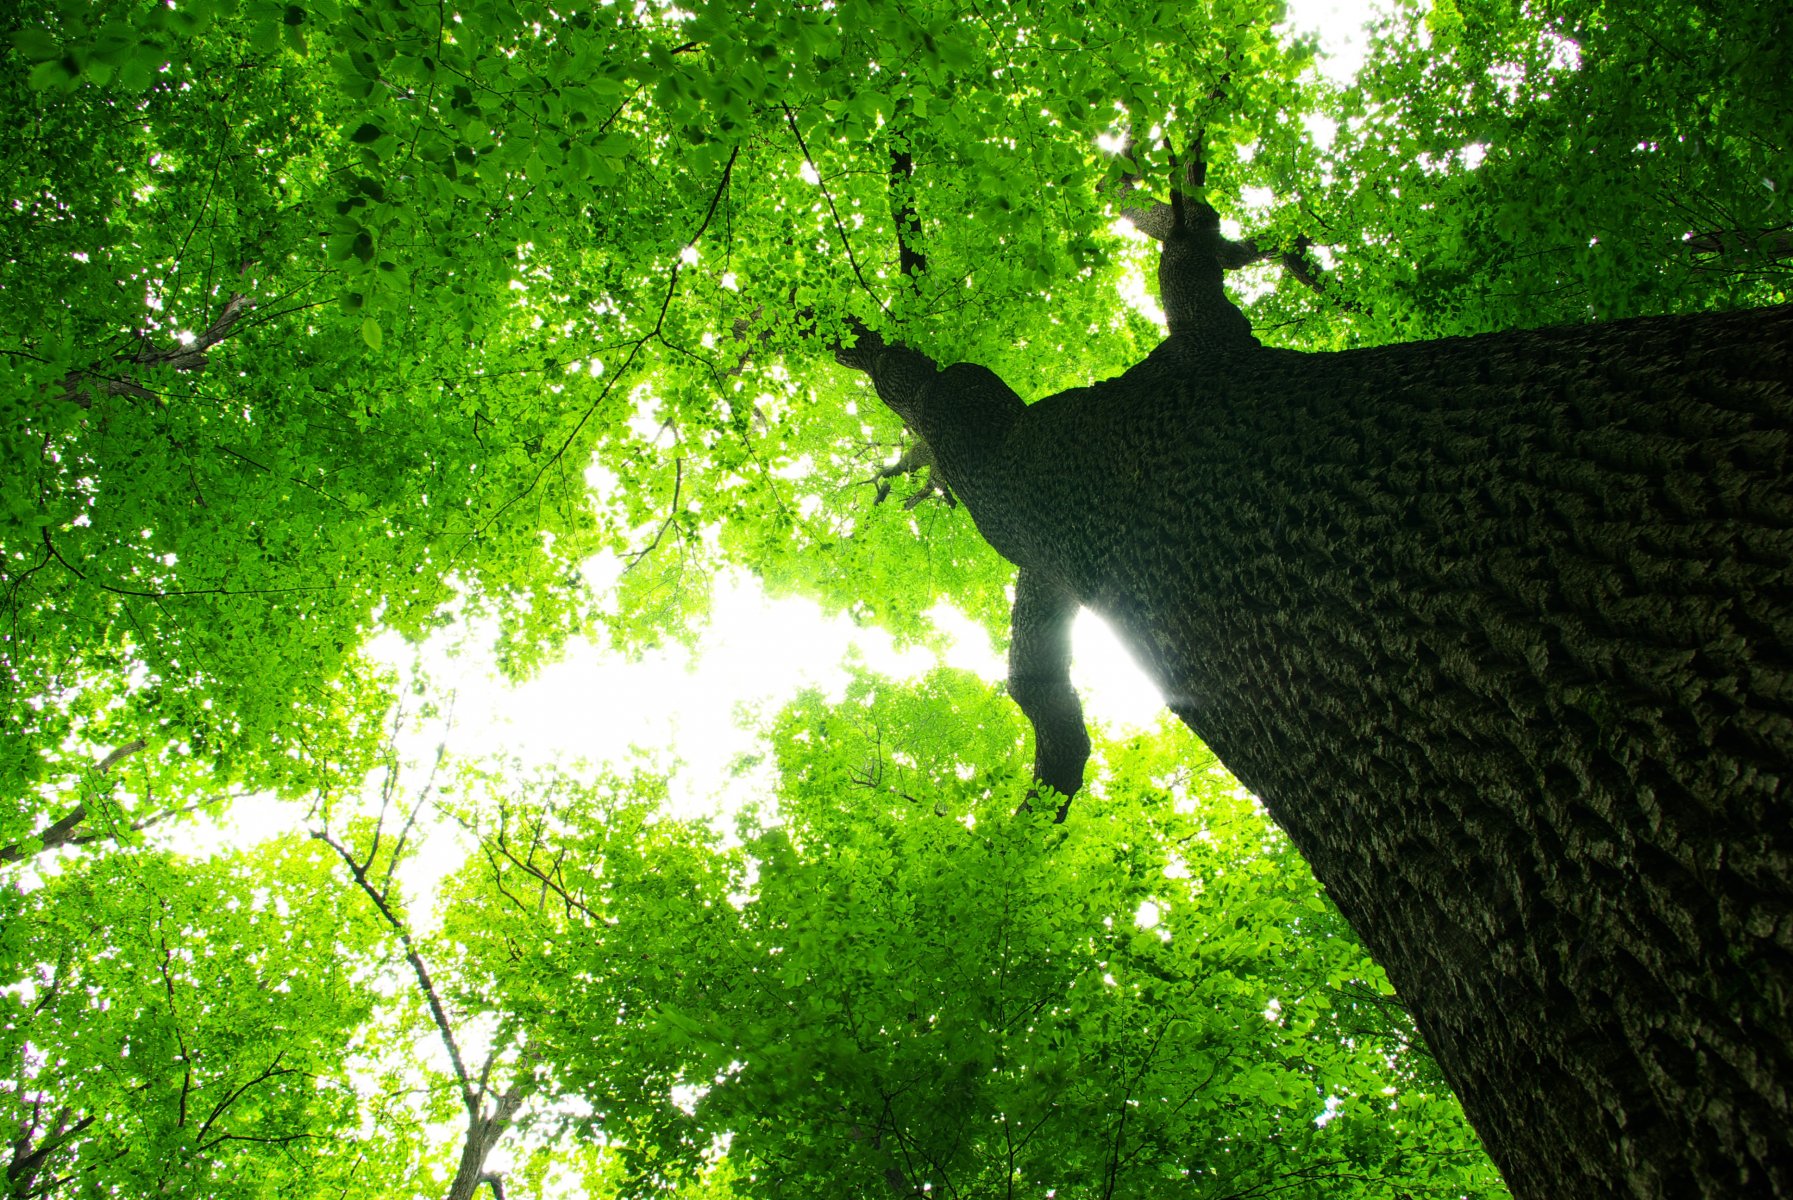 Looking up at the canopy of a large oak tree.